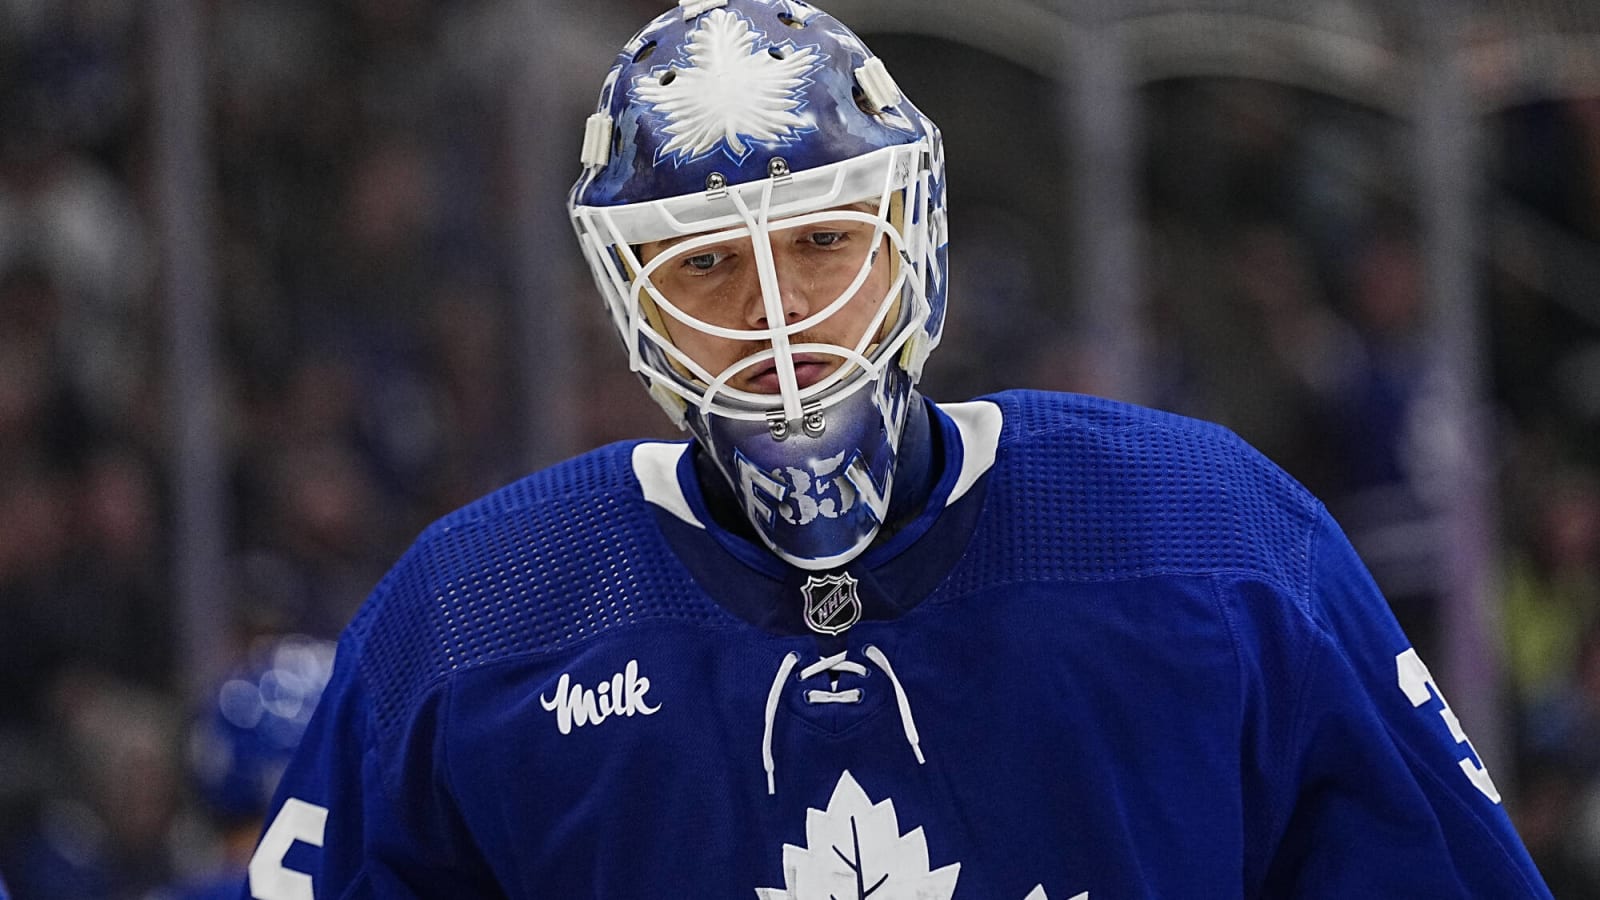 What’s the Reaction to Maple Leafs Samsonov’s Arbitration Ruling?